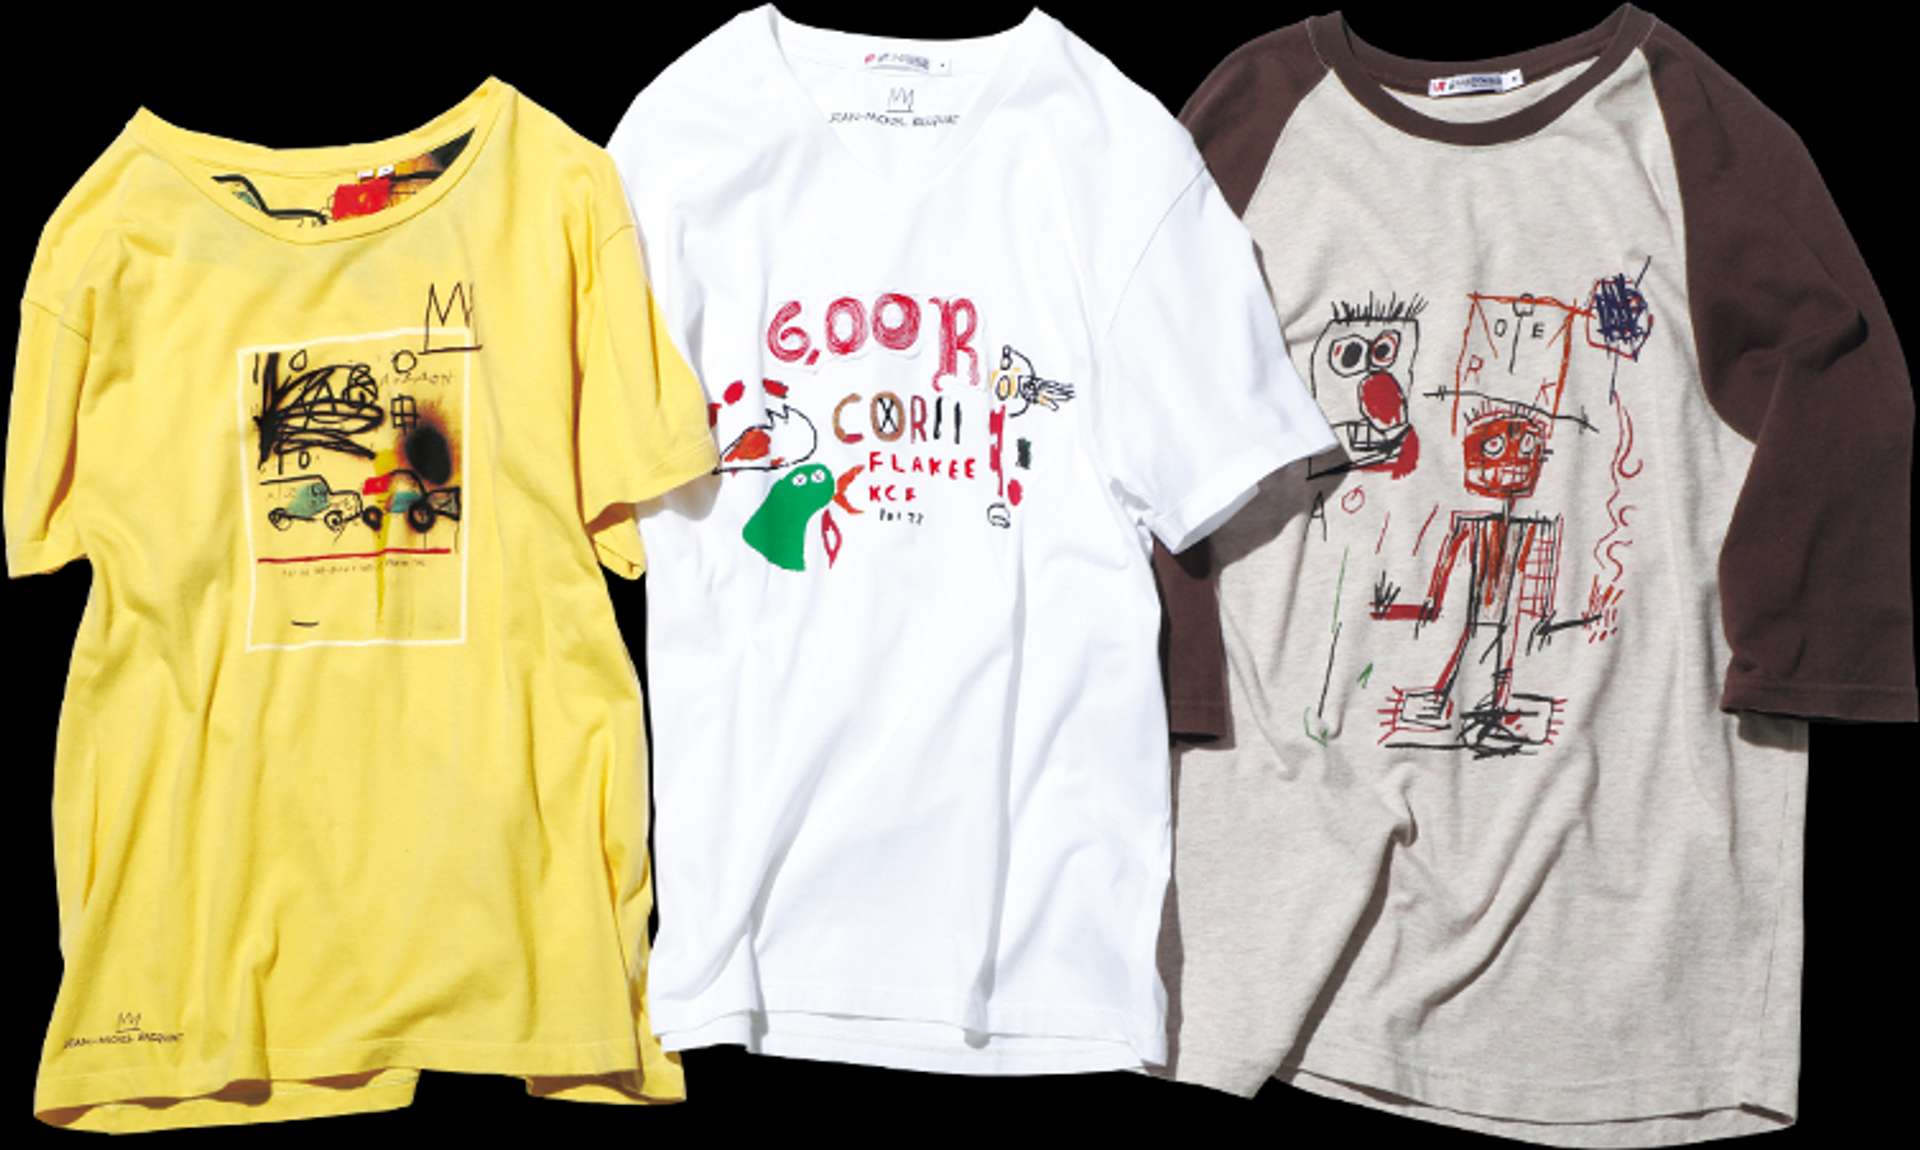 A collage of three T-shirts from three different drops that Uniqlo has done in partnership with the Basquiat estate.